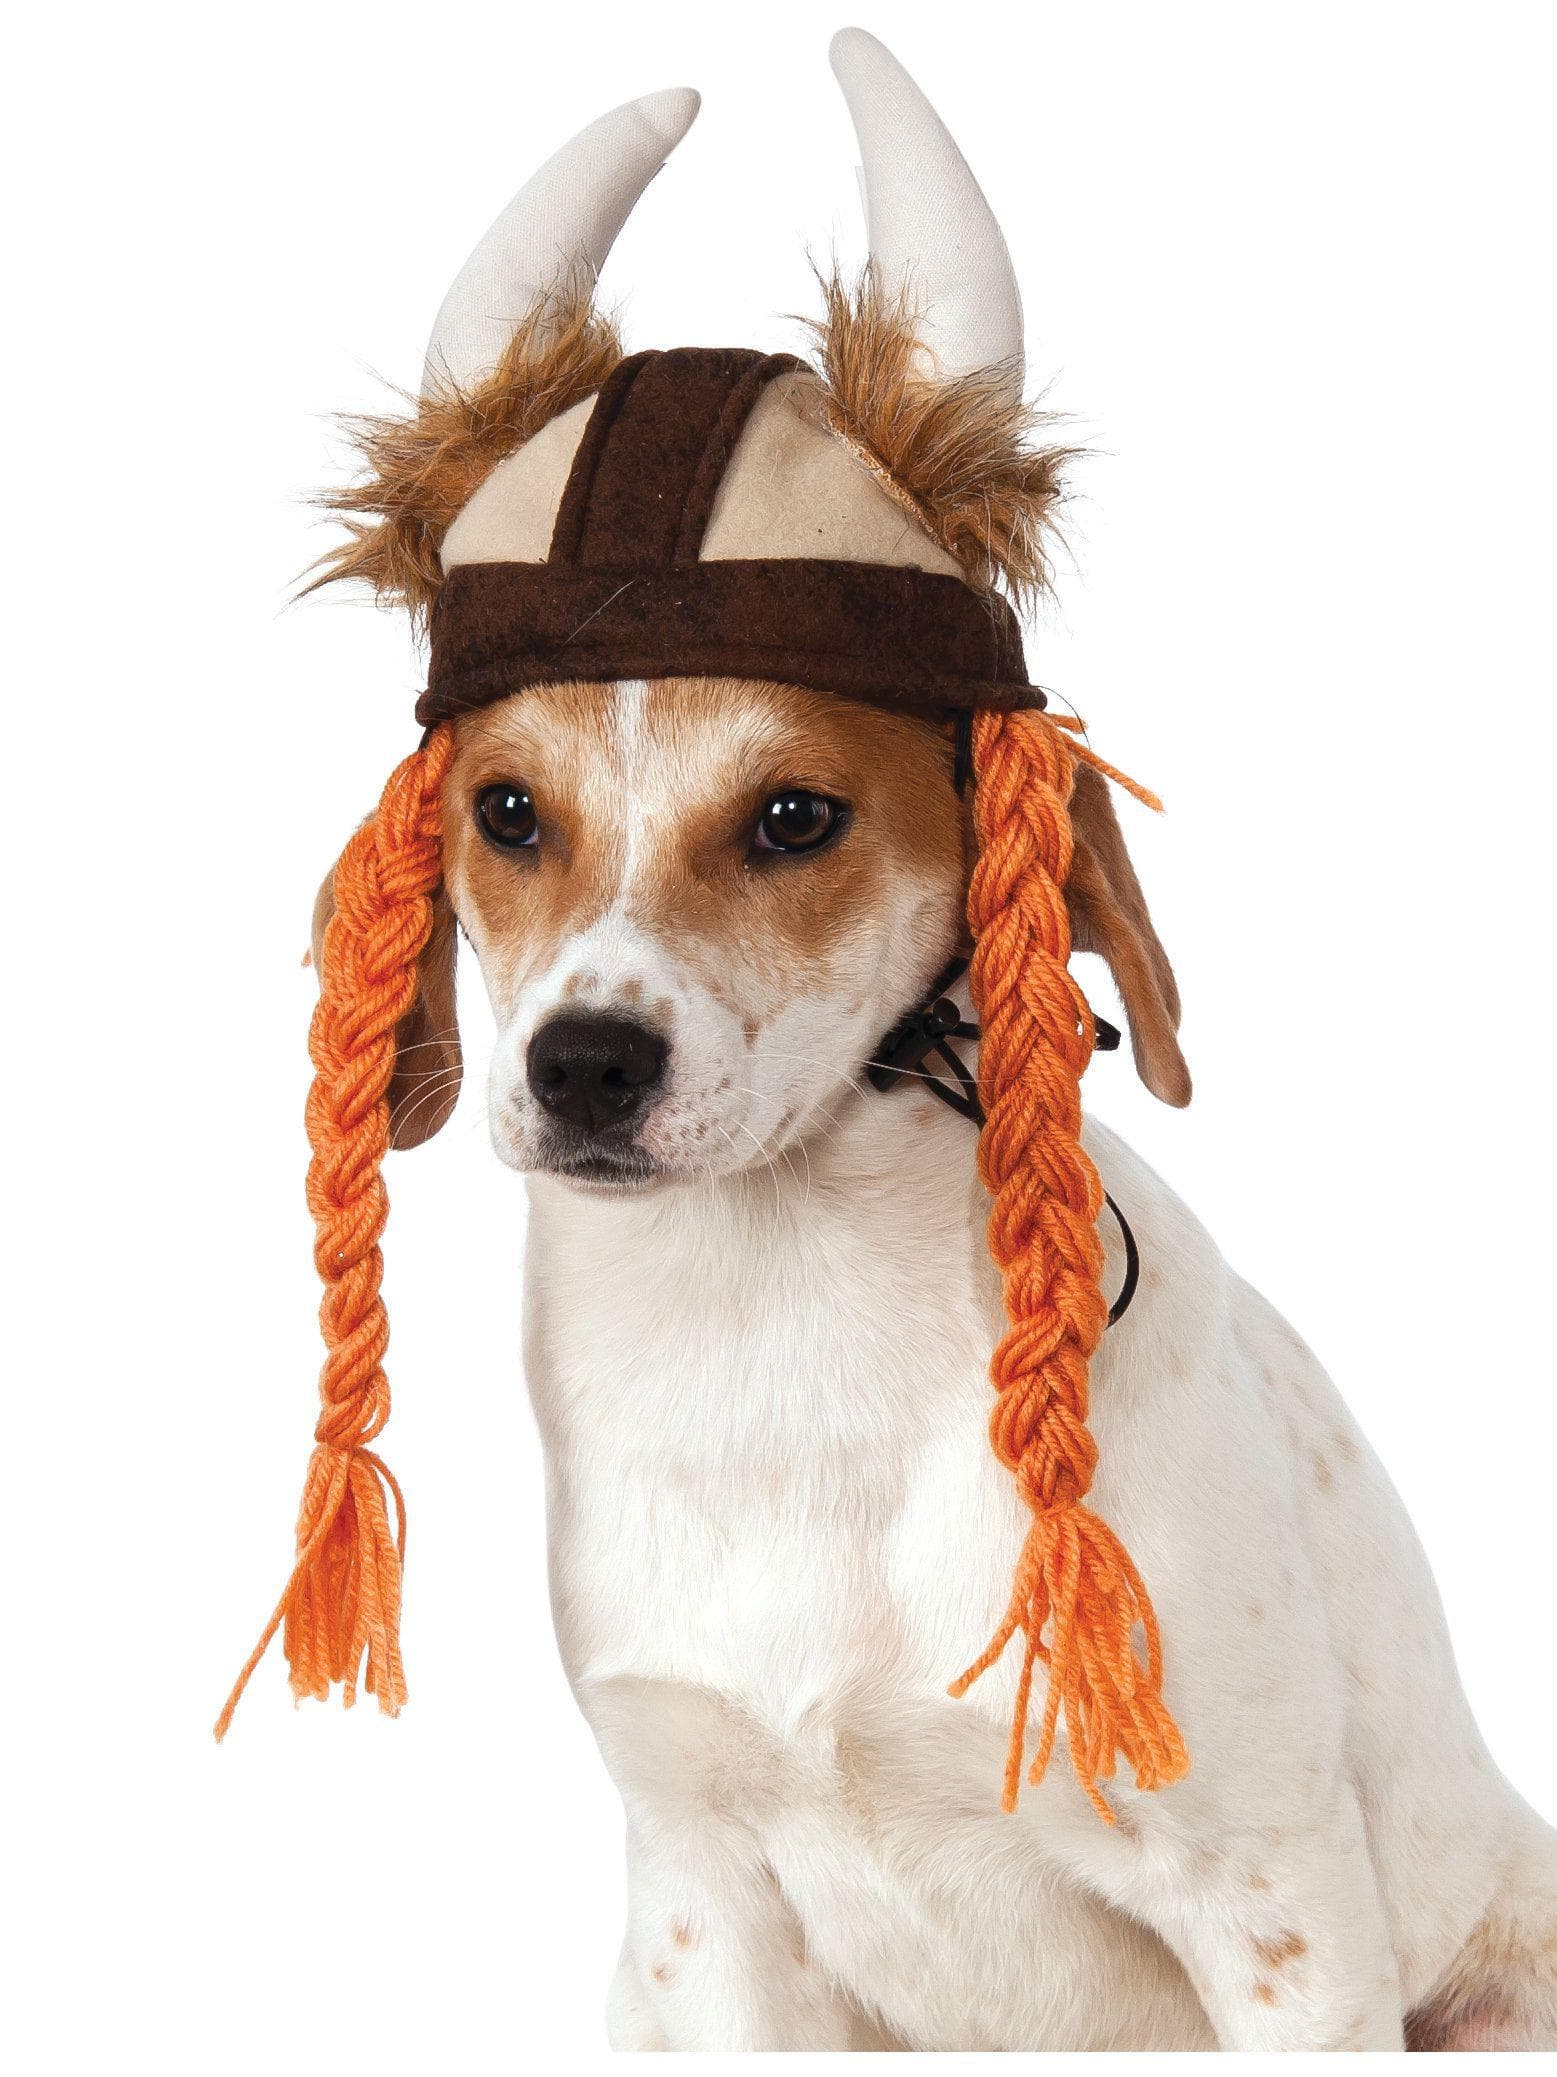 Viking Inspired Pet Hat with Braids - costumes.com